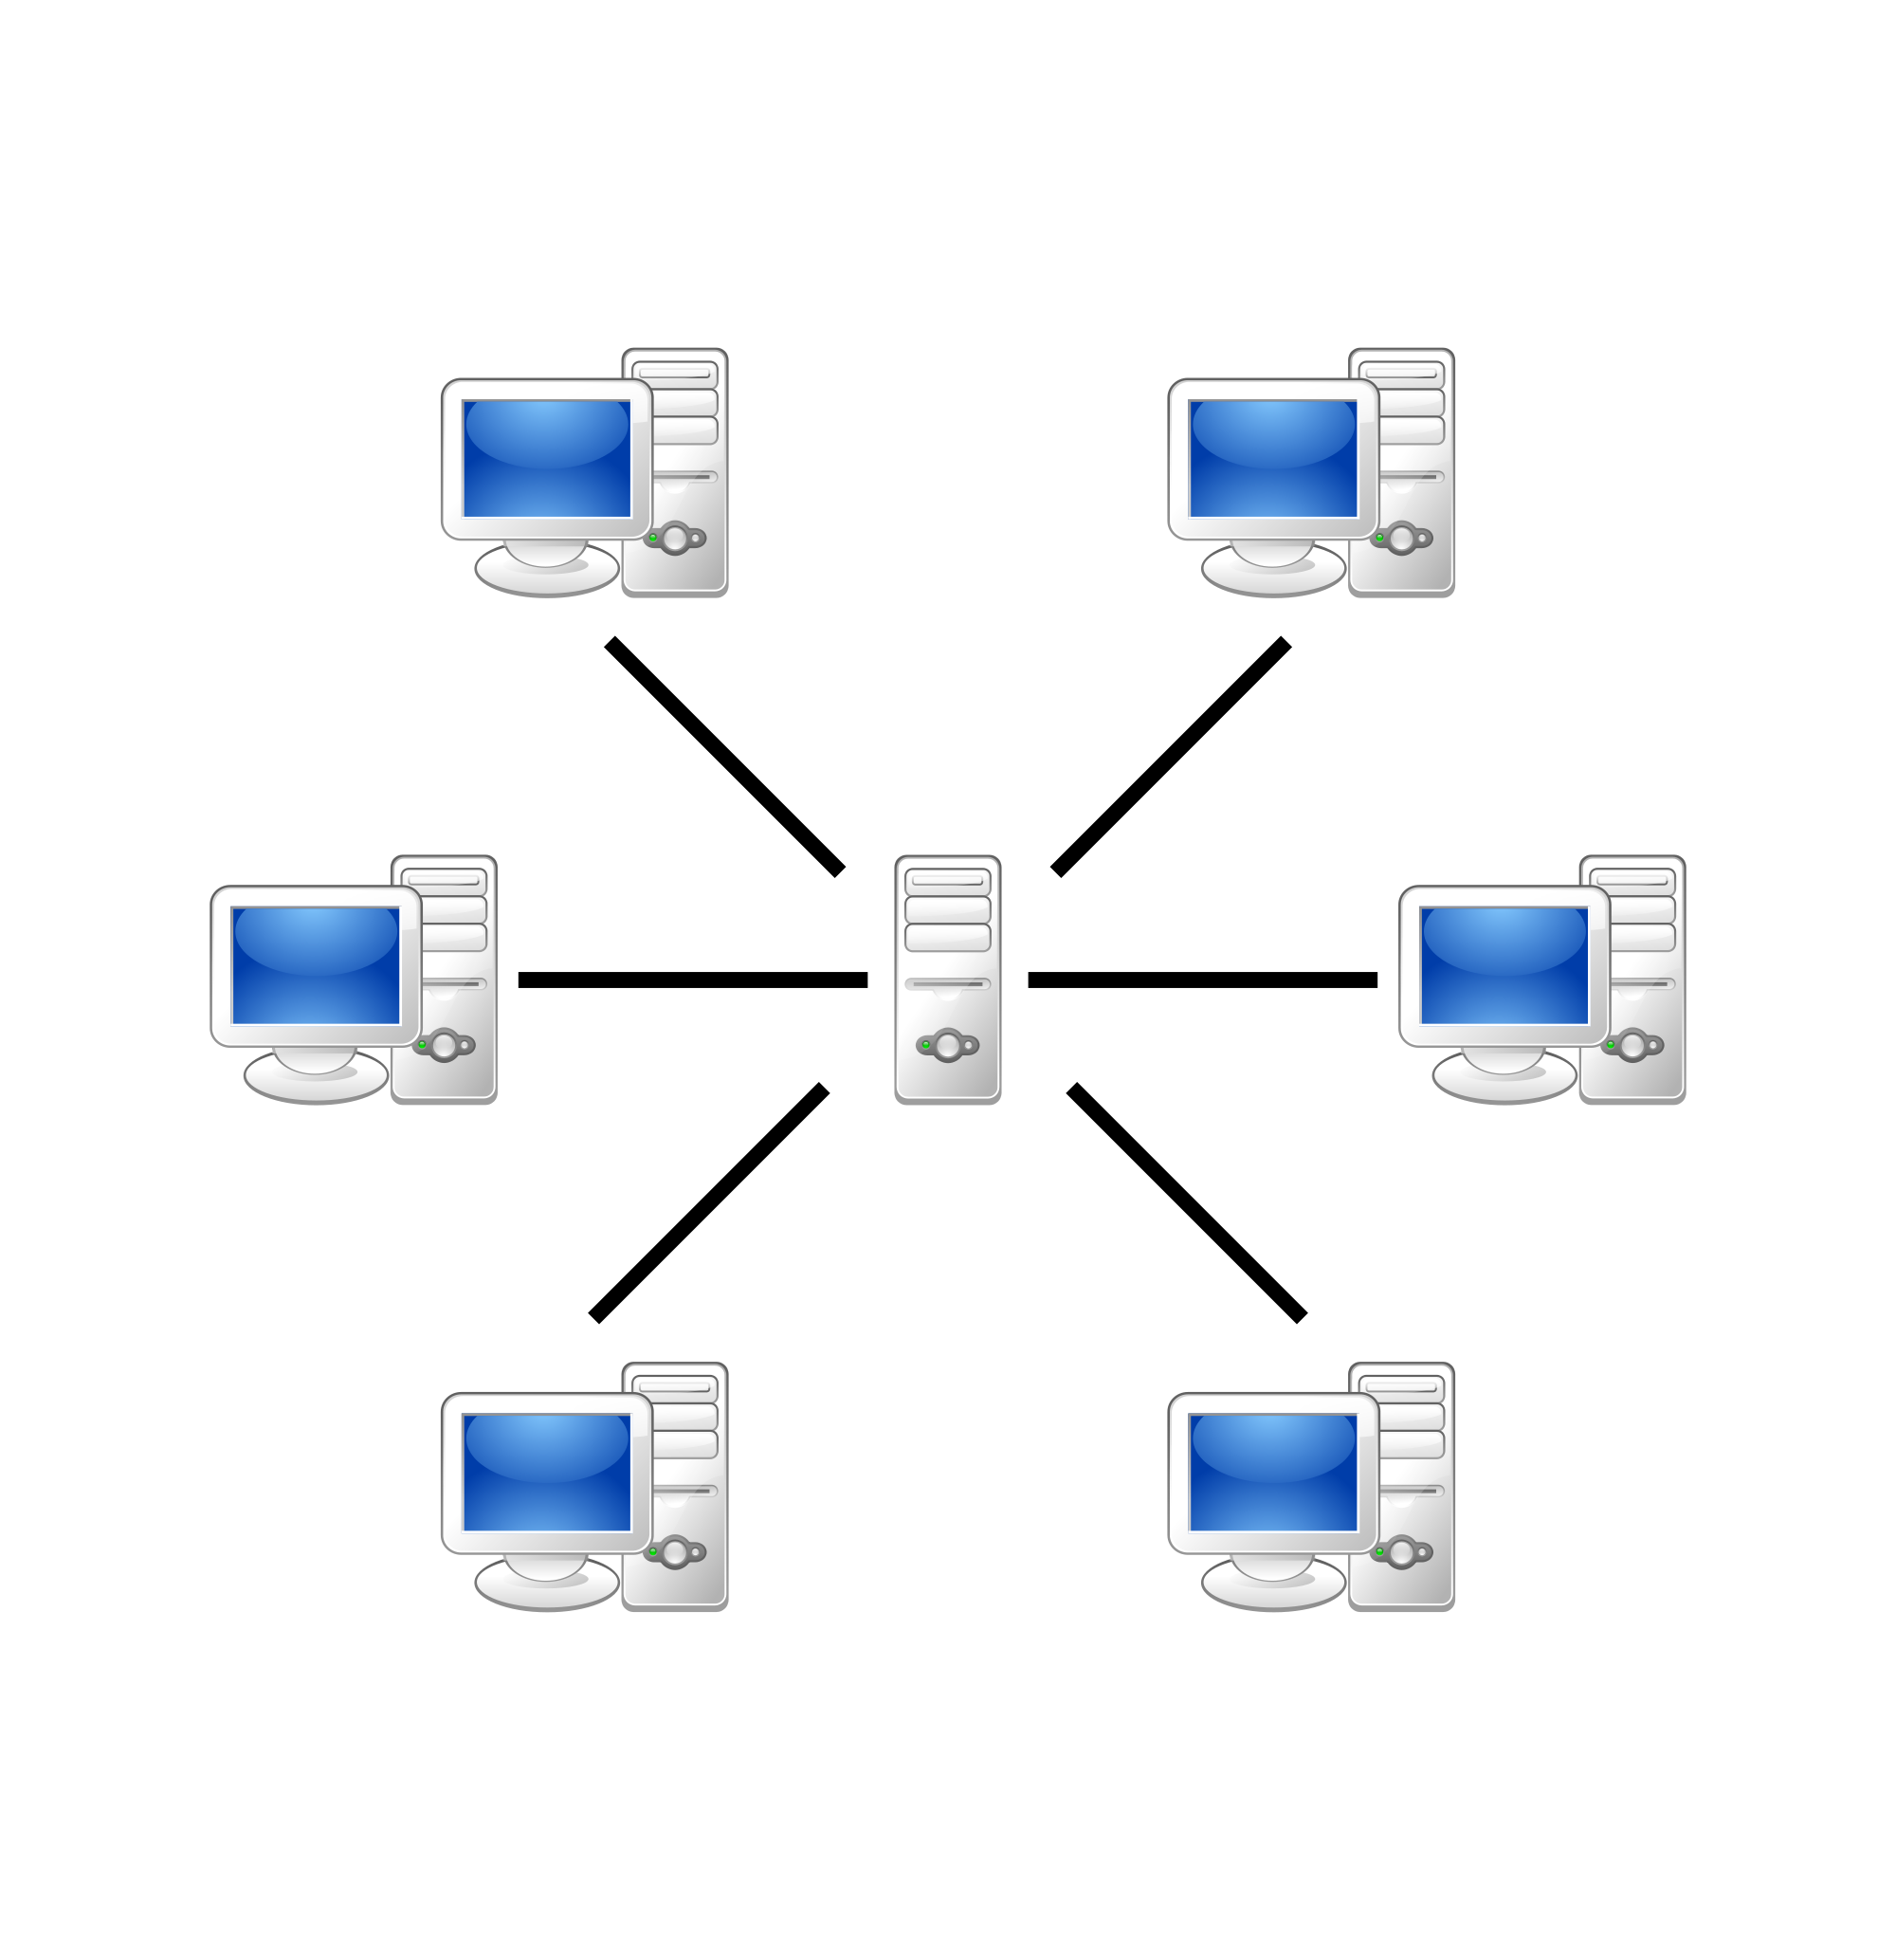 File:Network.png